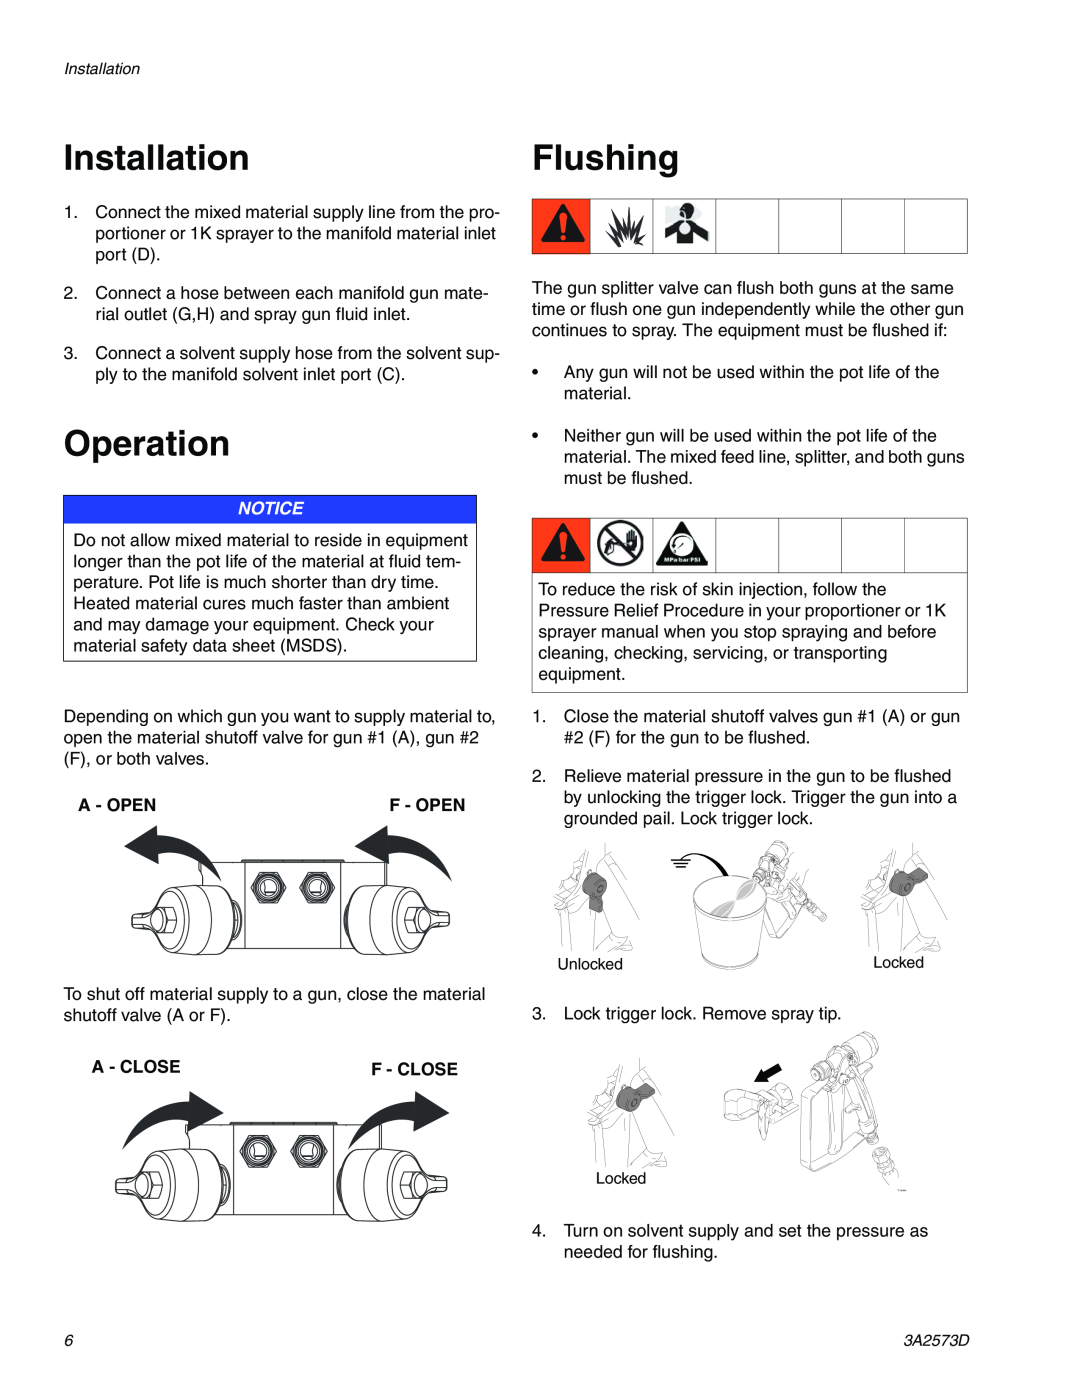 Graco 3A2573D important safety instructions InstallationFlushing, Operation, A - Open, F - Open, A - Closef - Close 